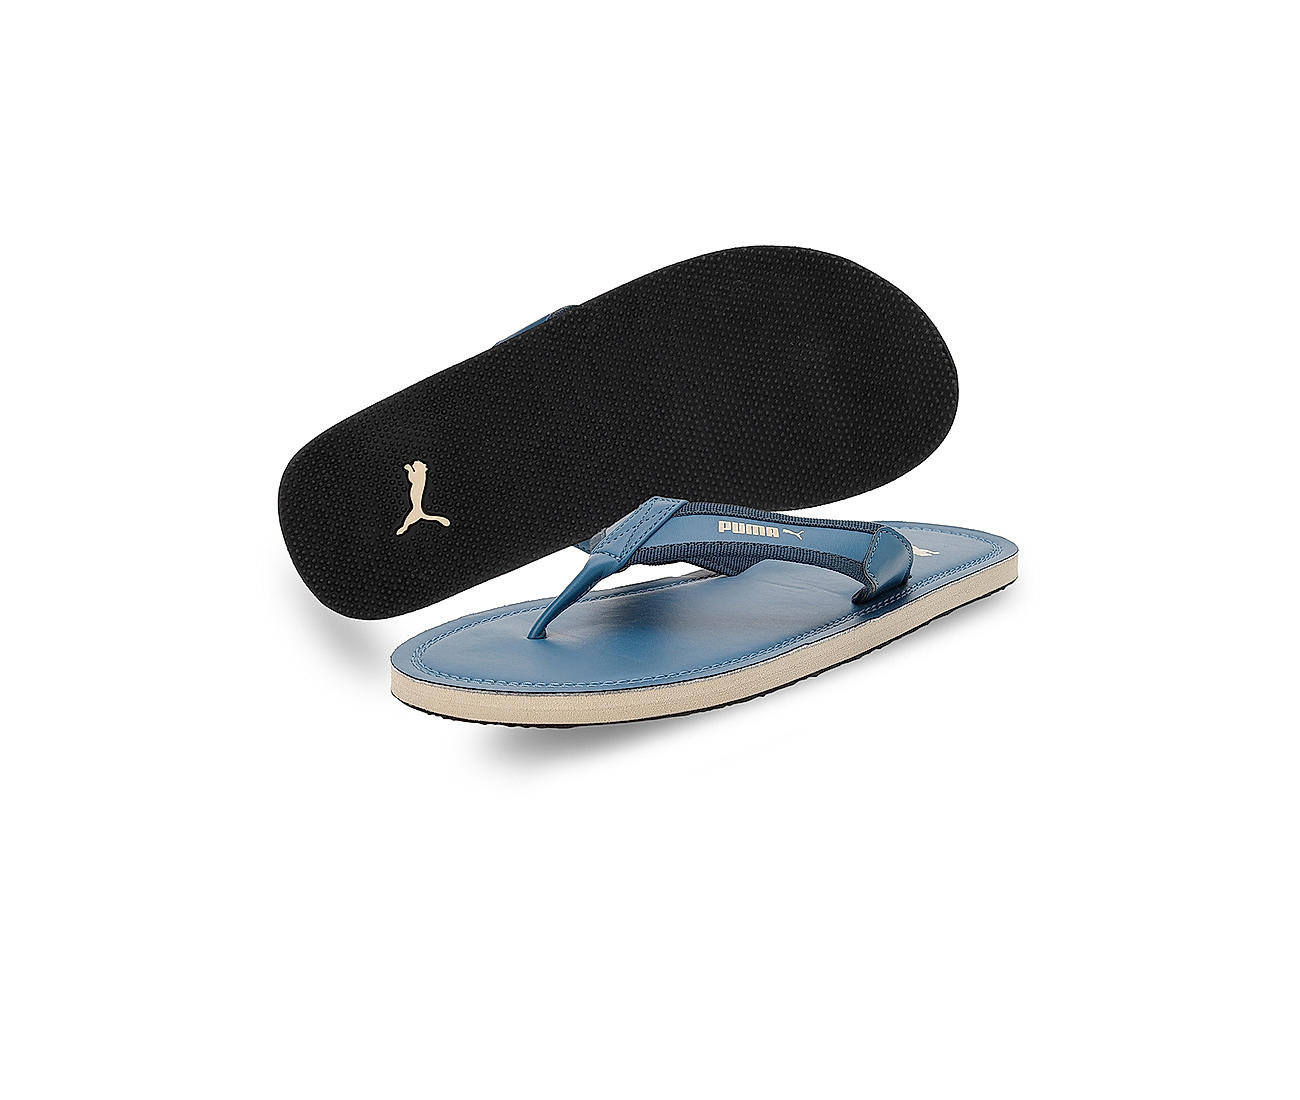 Puma slippers size 10,brand new with tags | Puma slippers, Puma, Slippers-thanhphatduhoc.com.vn